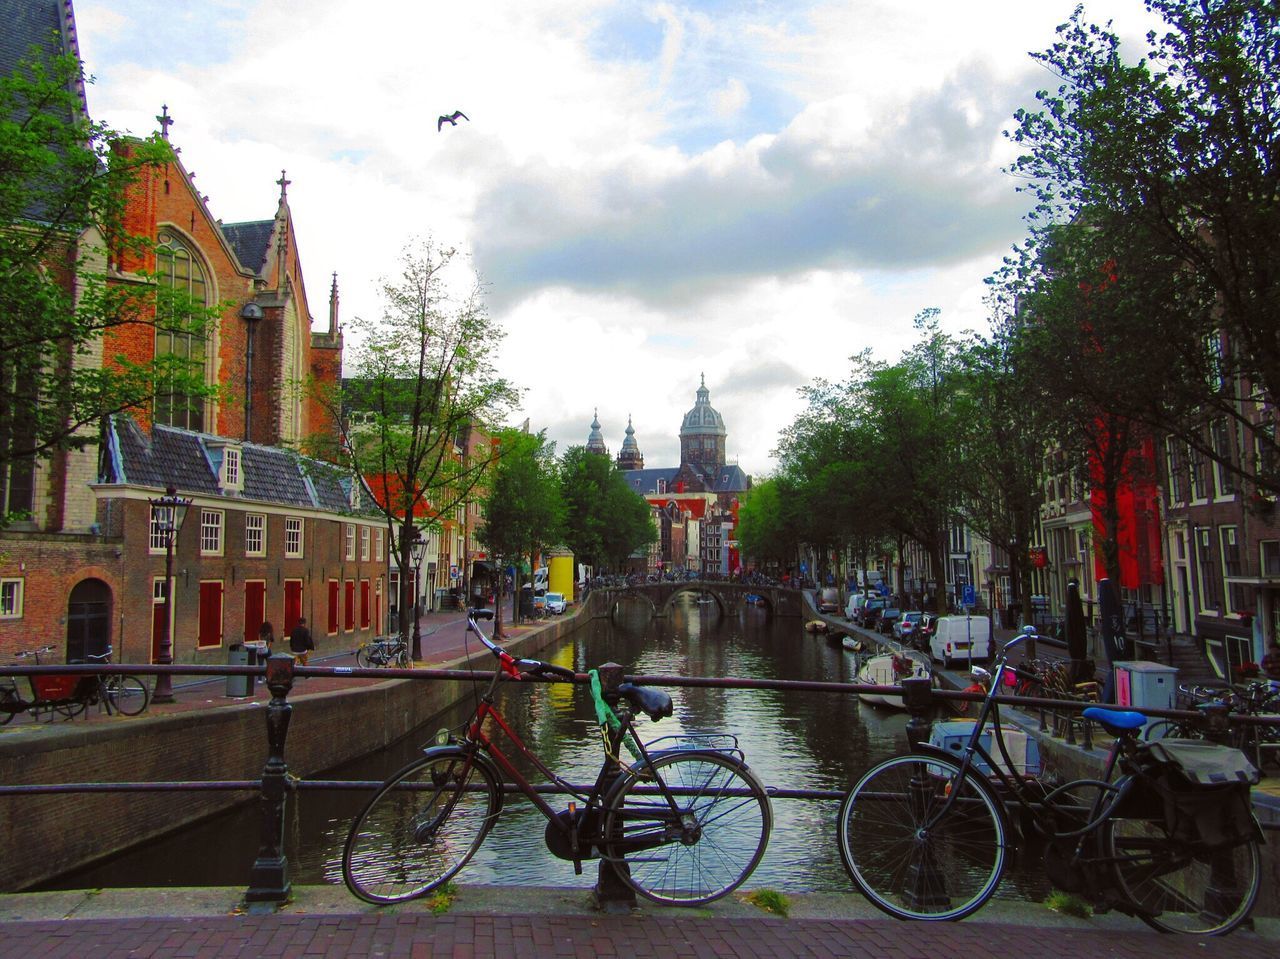 BICYCLES IN CANAL AGAINST BUILDINGS